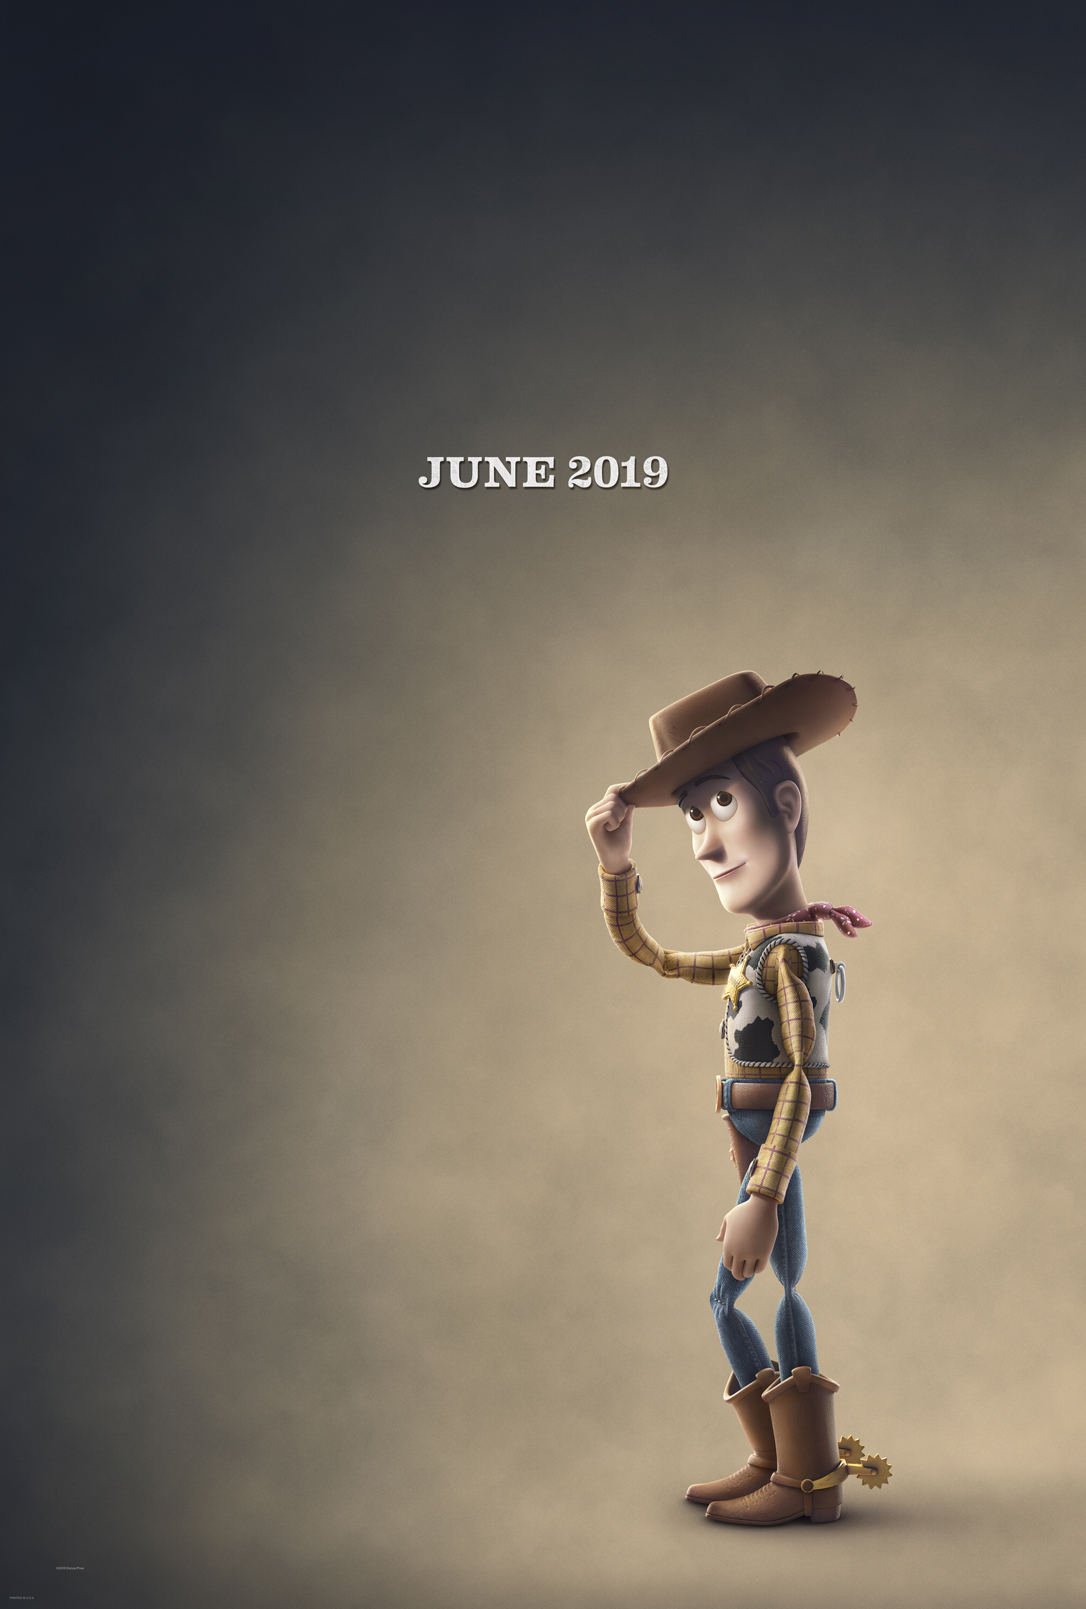 Toy_Story_4